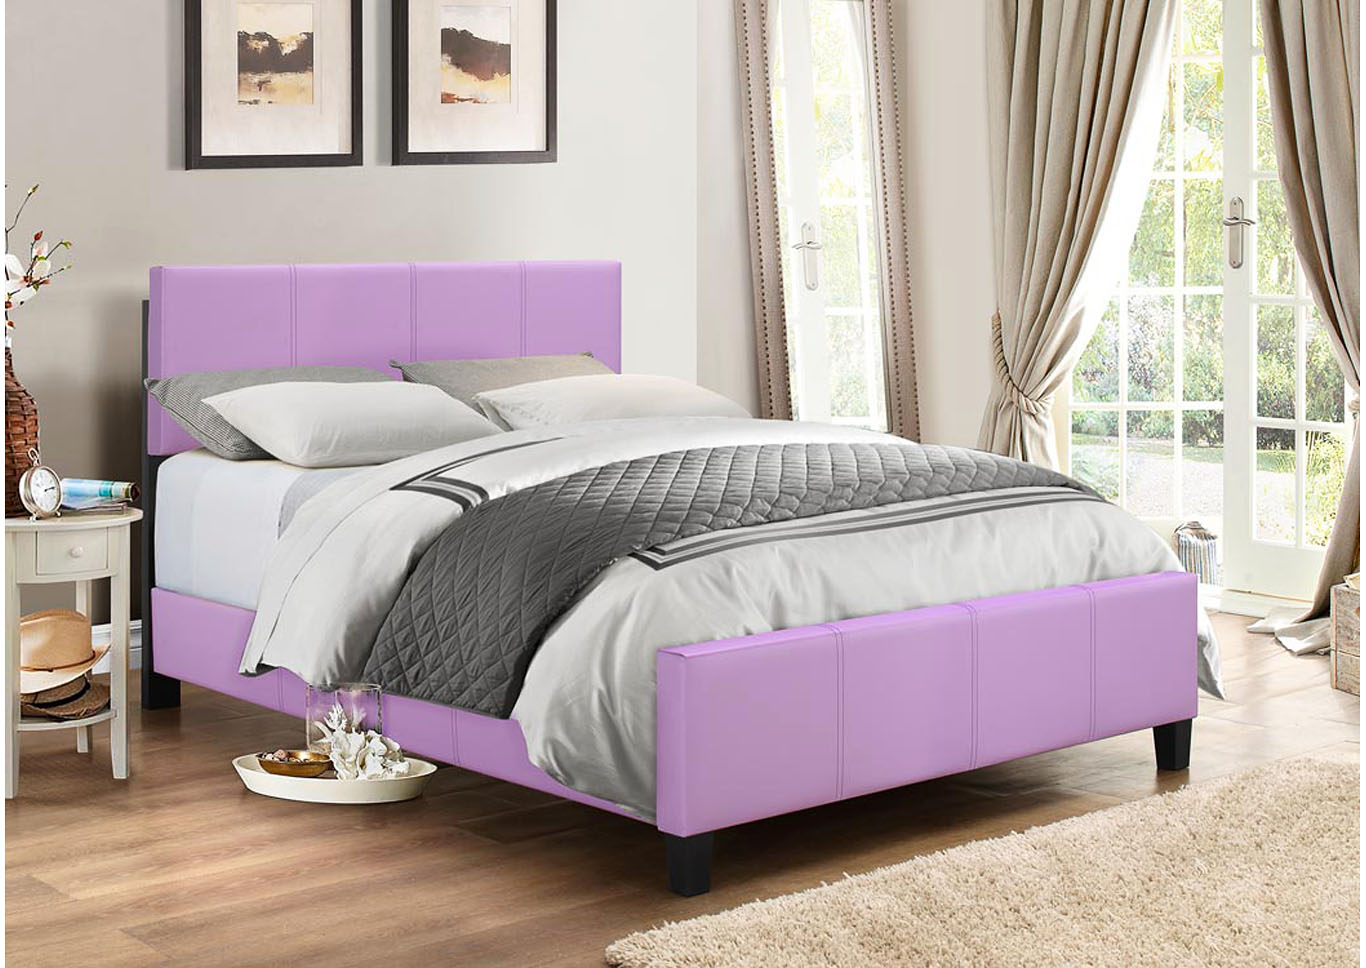 Zenfield Lilac Panel Full Bed,Global Trading